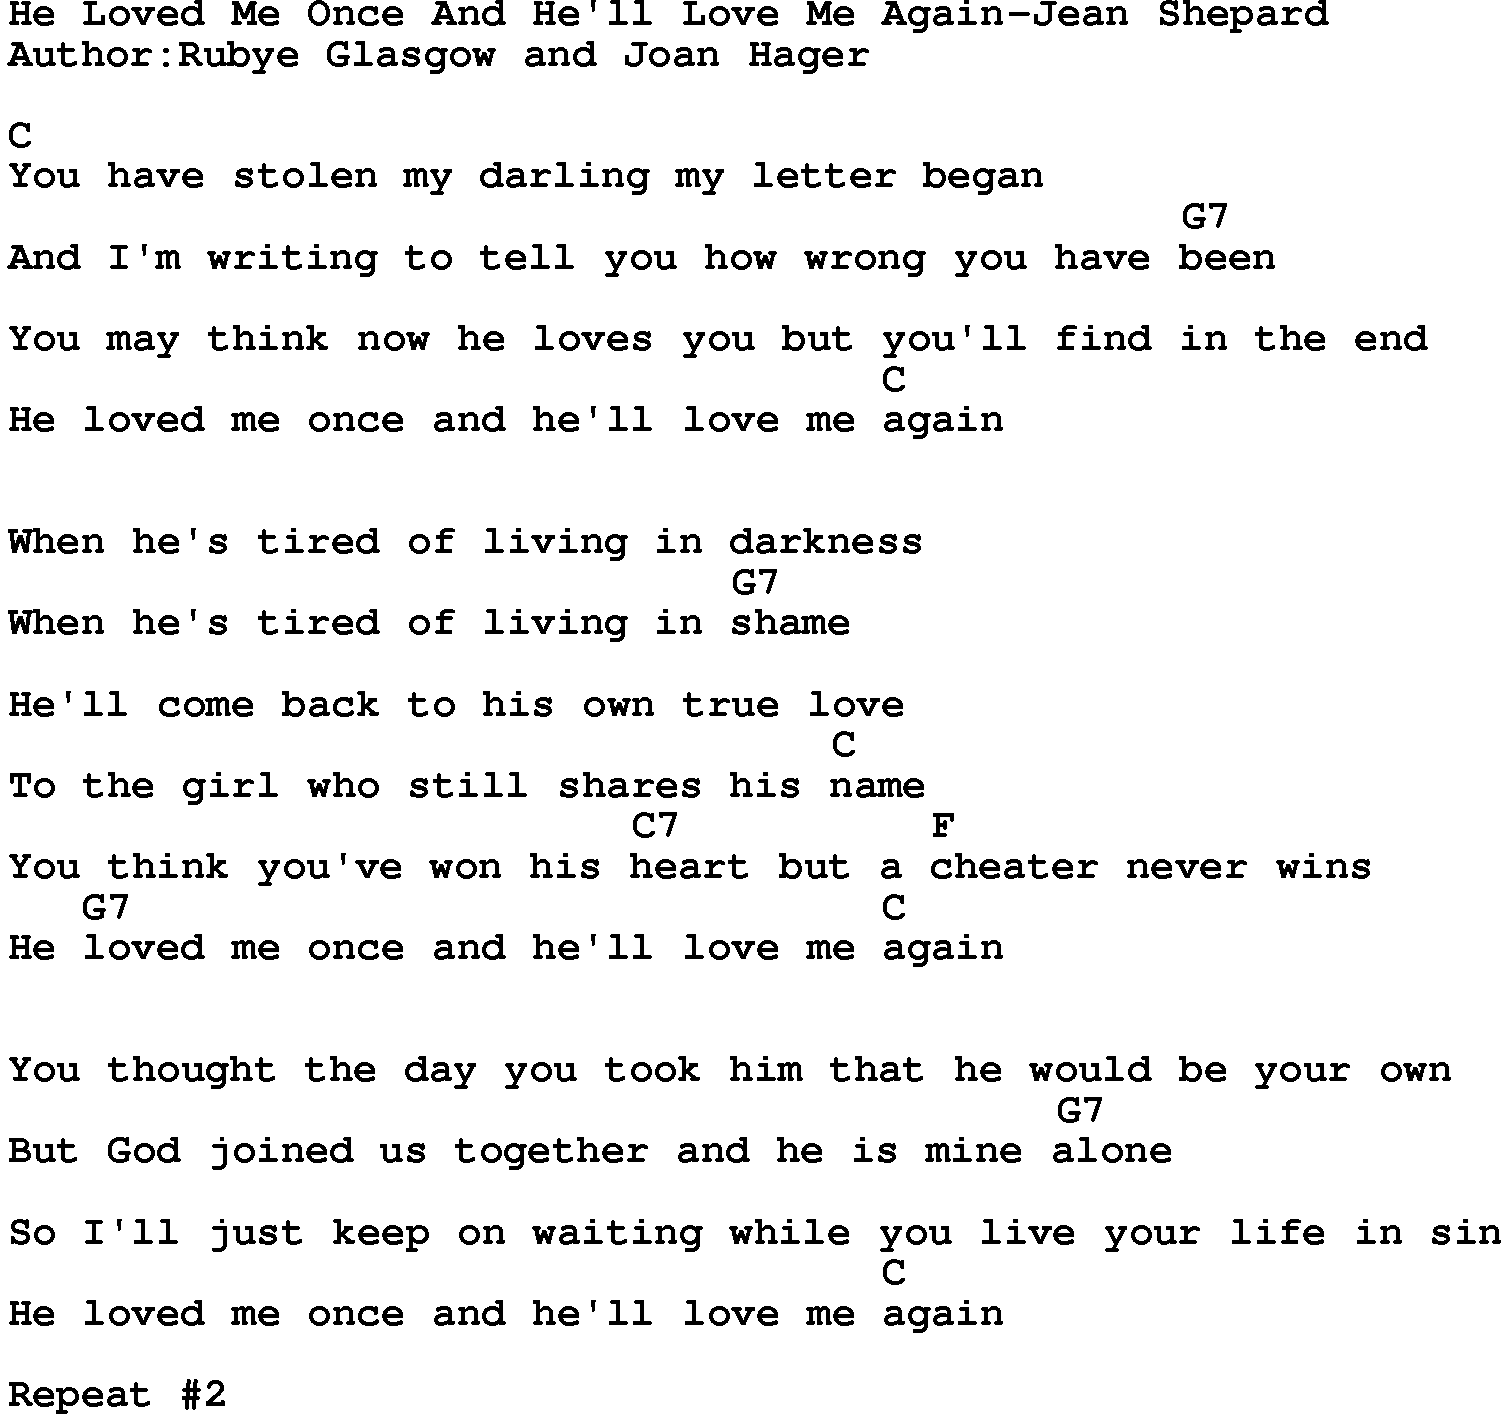 Country music song: He Loved Me Once And He'll Love Me Again-Jean Shepard lyrics and chords